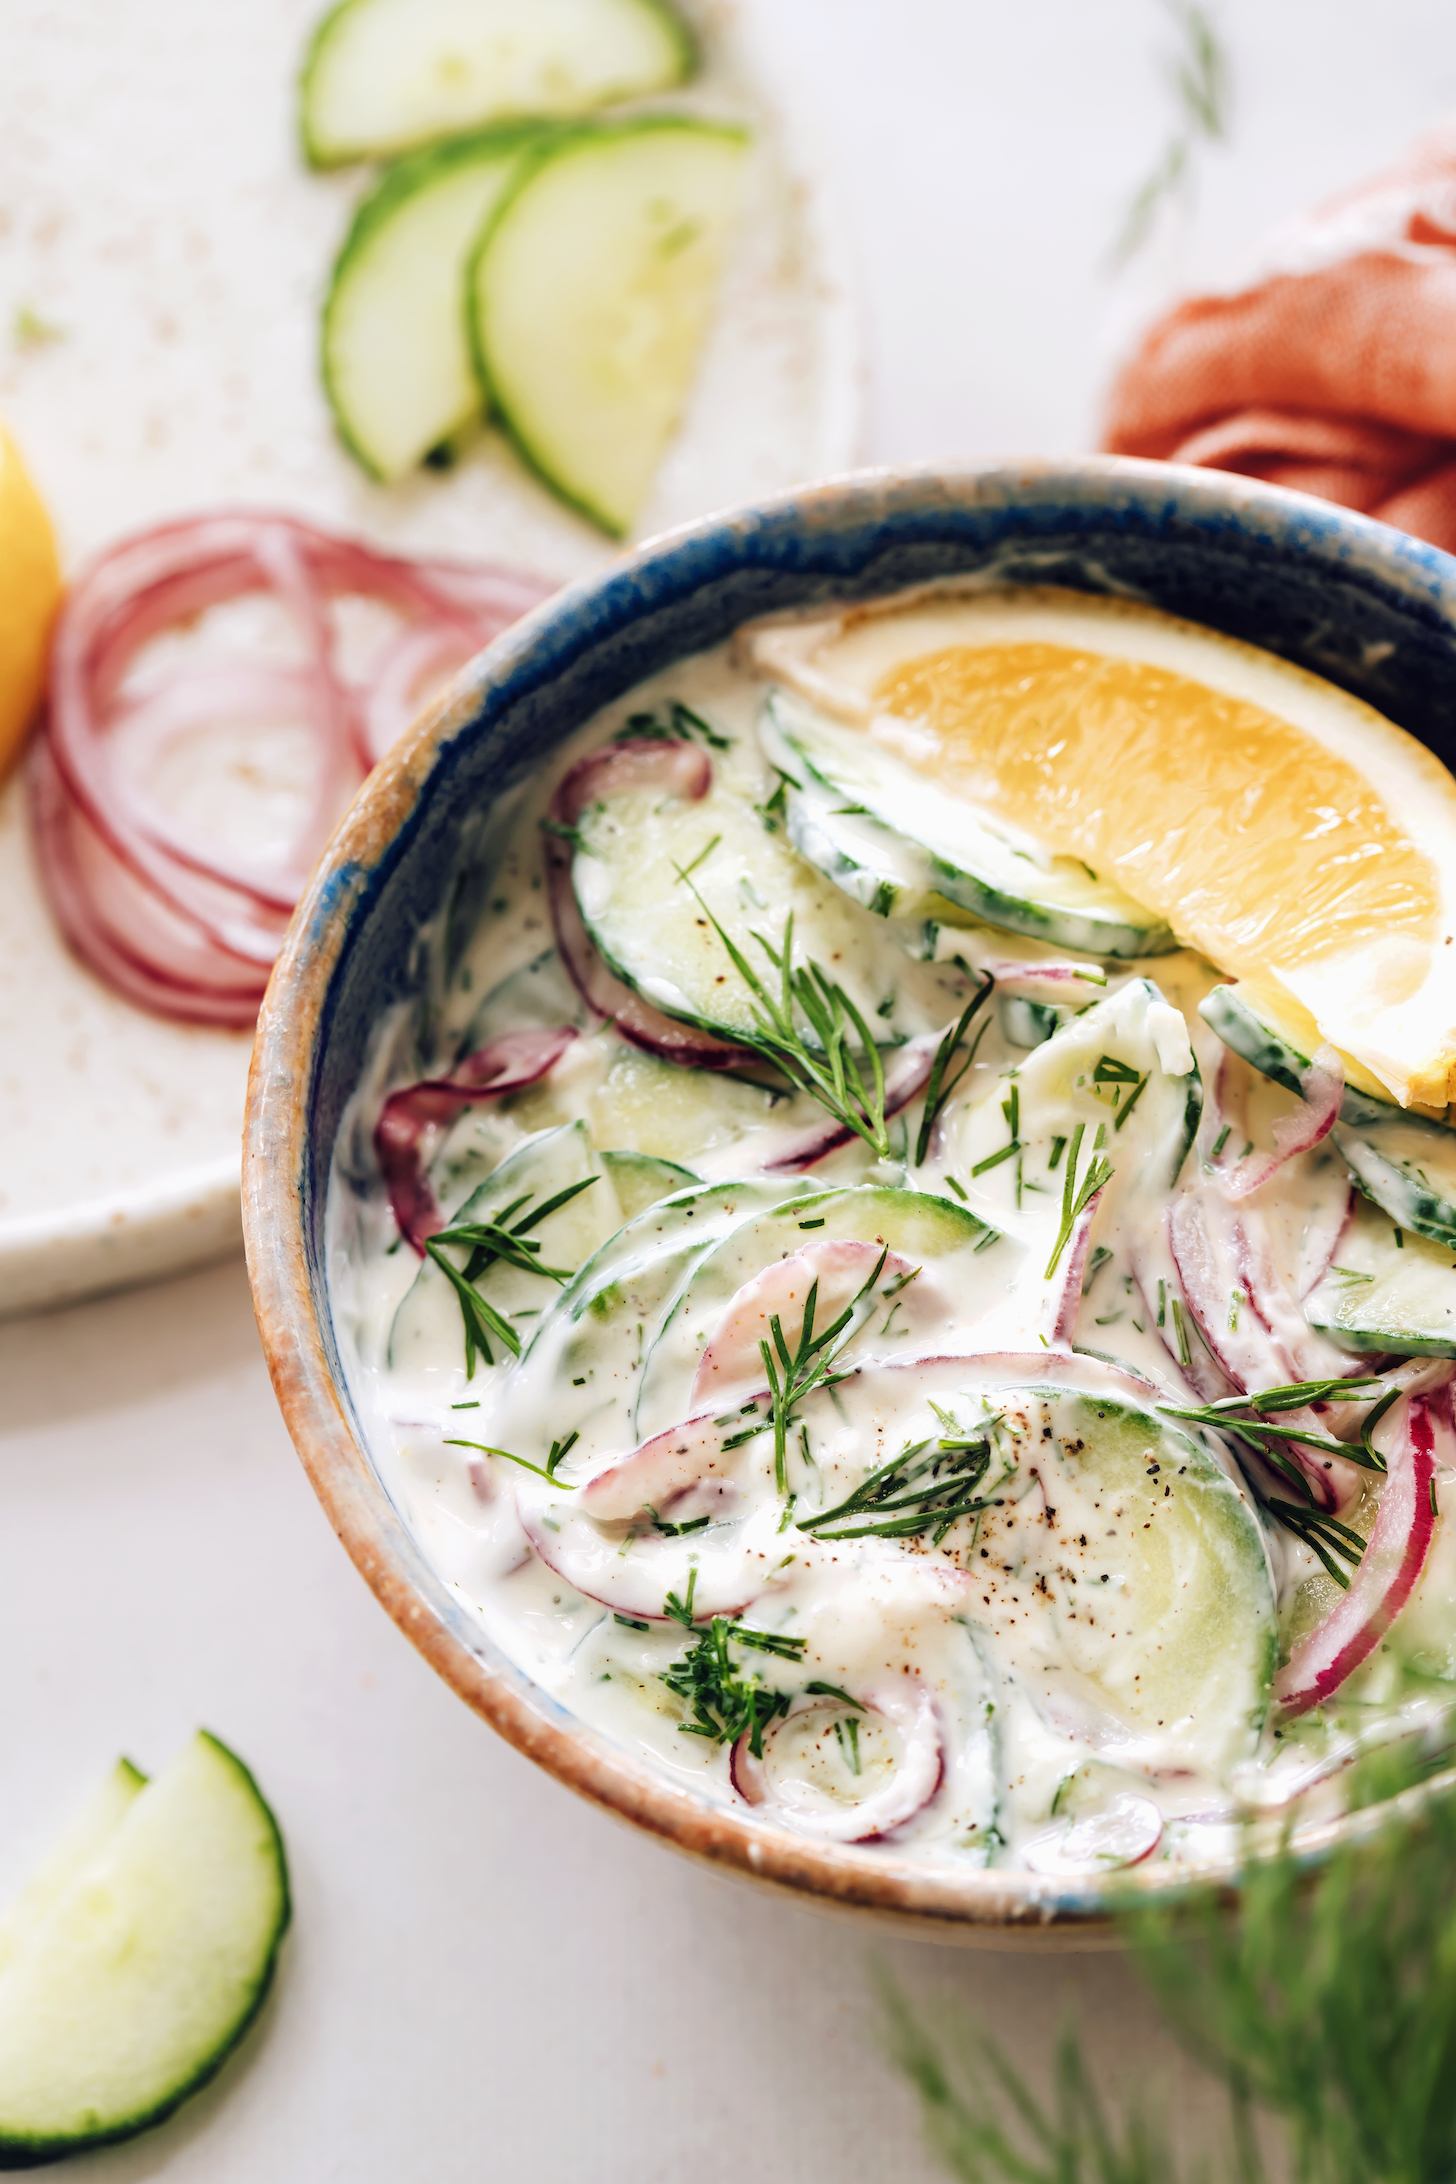 Bowl of creamy cucumber onion salad with fresh dill